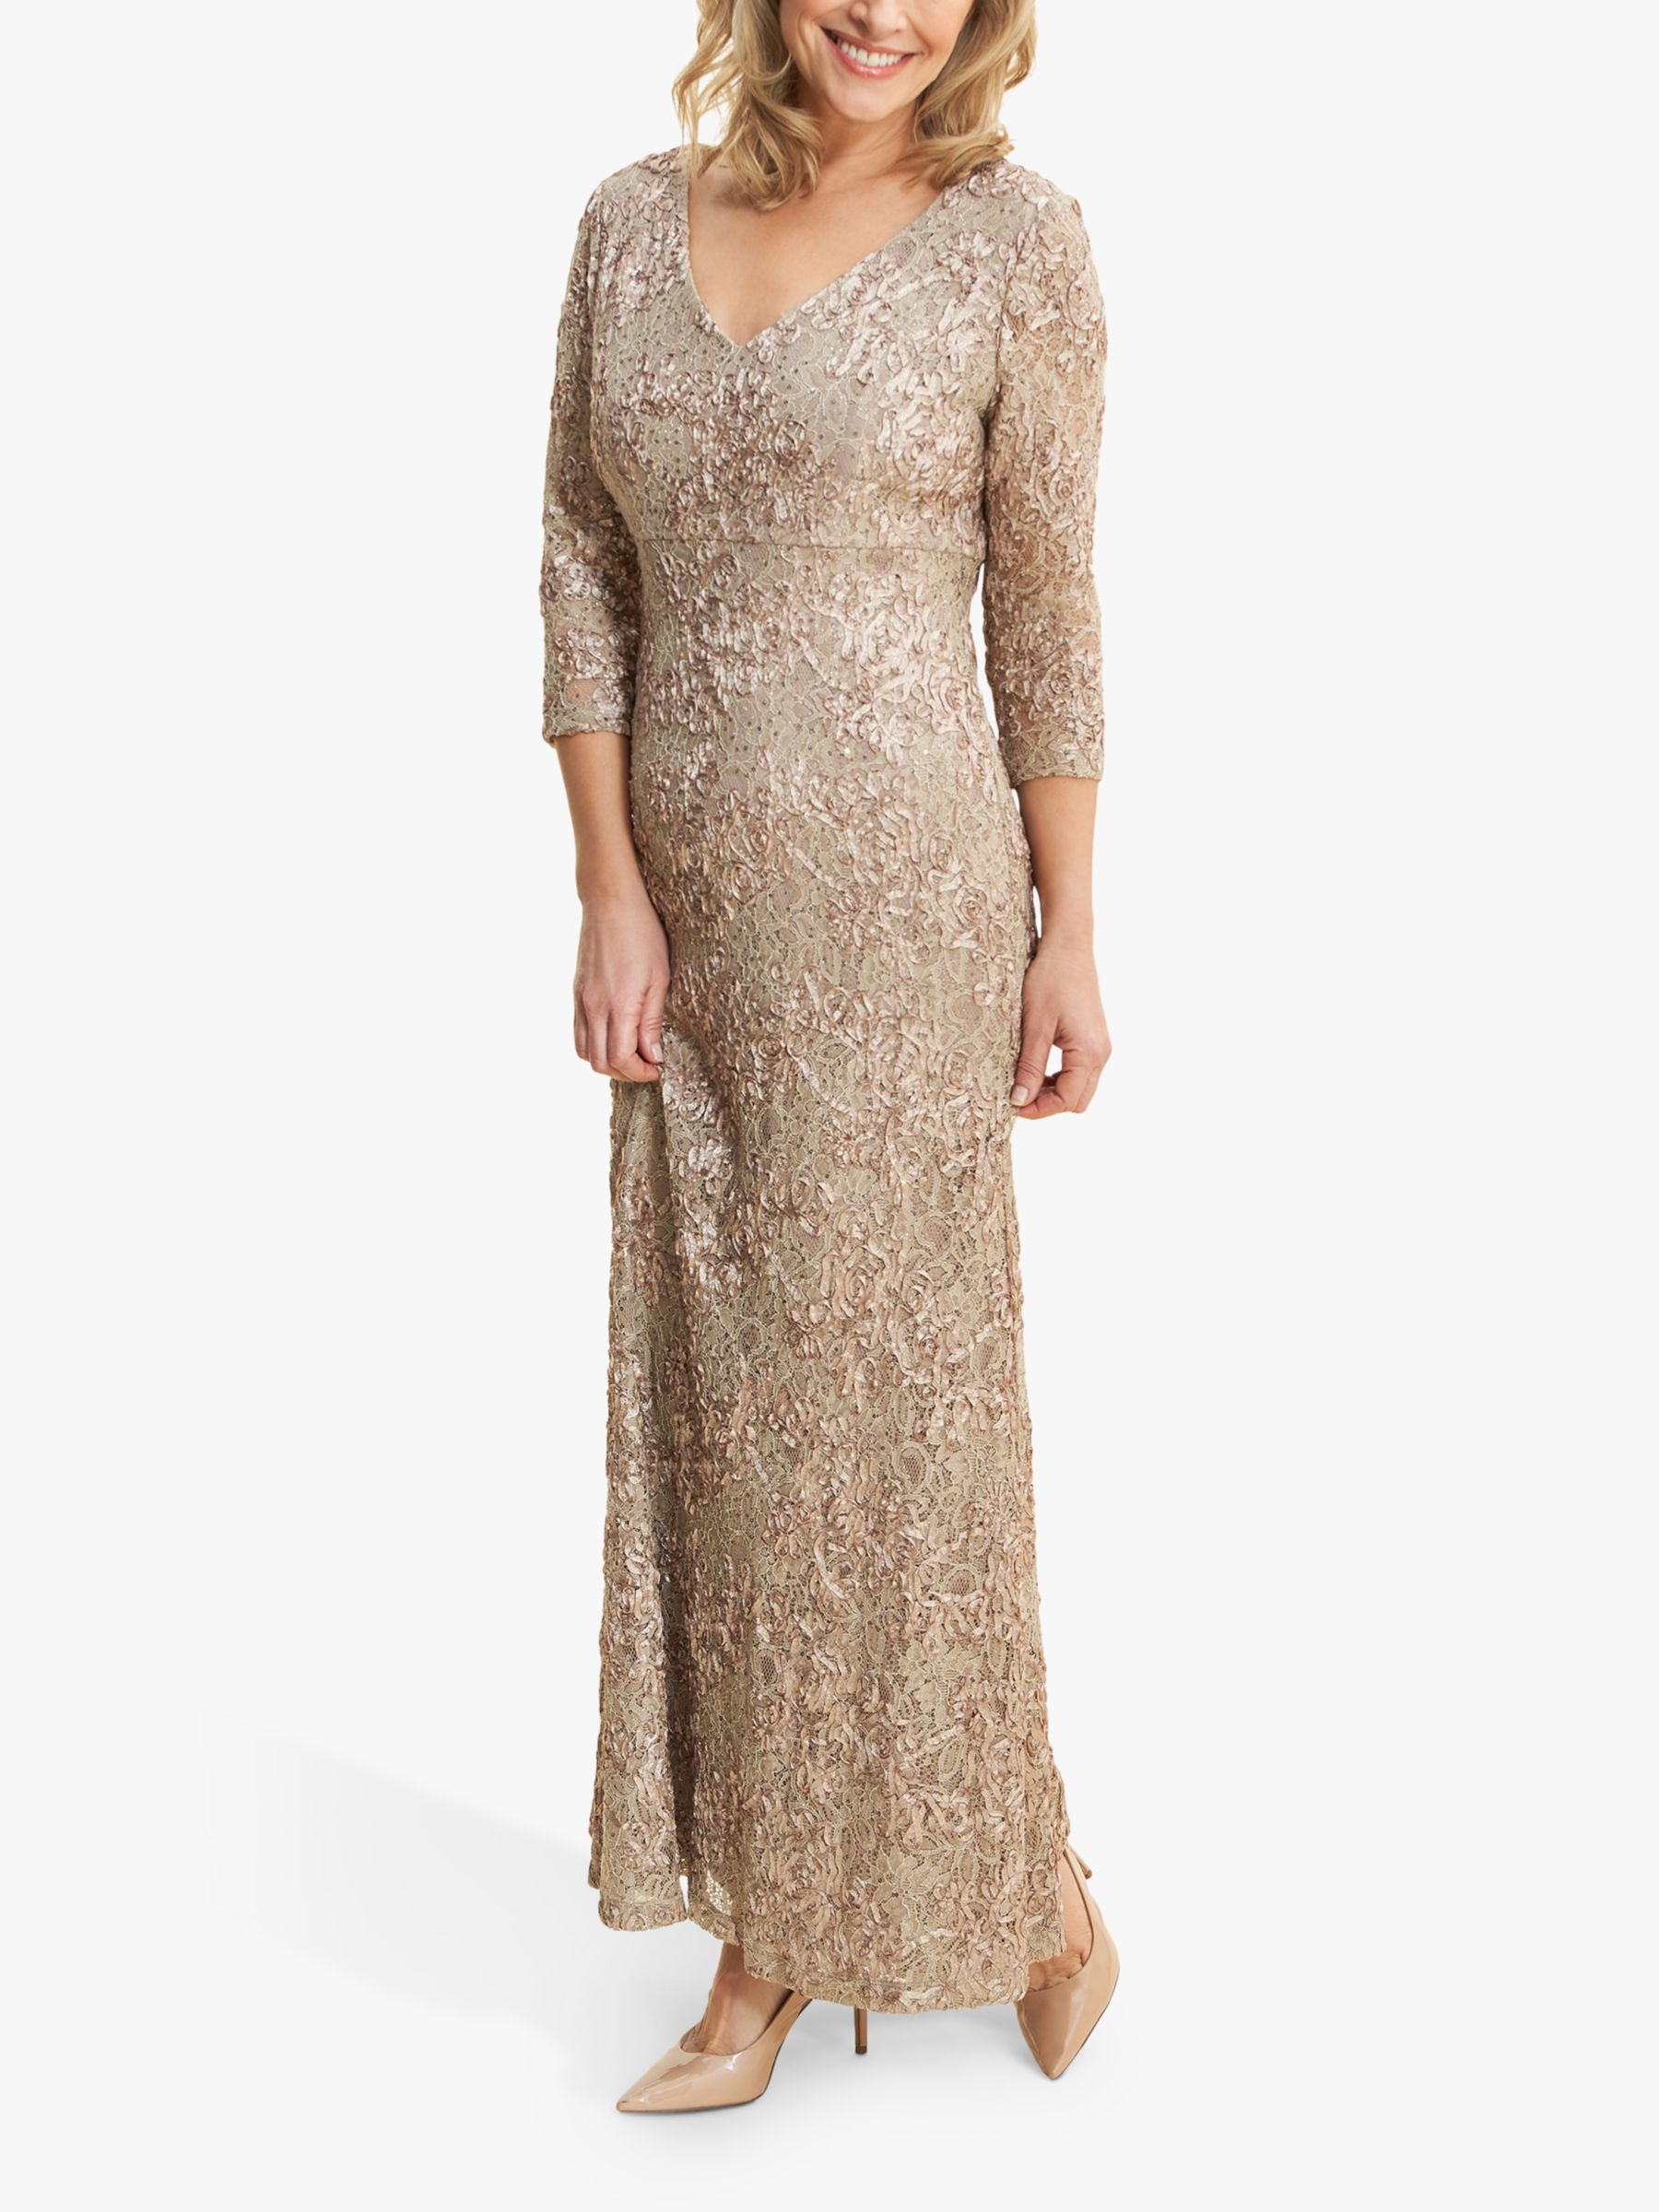 Gina Bacconi Pauline Embroidered Lace Maxi Dress, Antique Gold